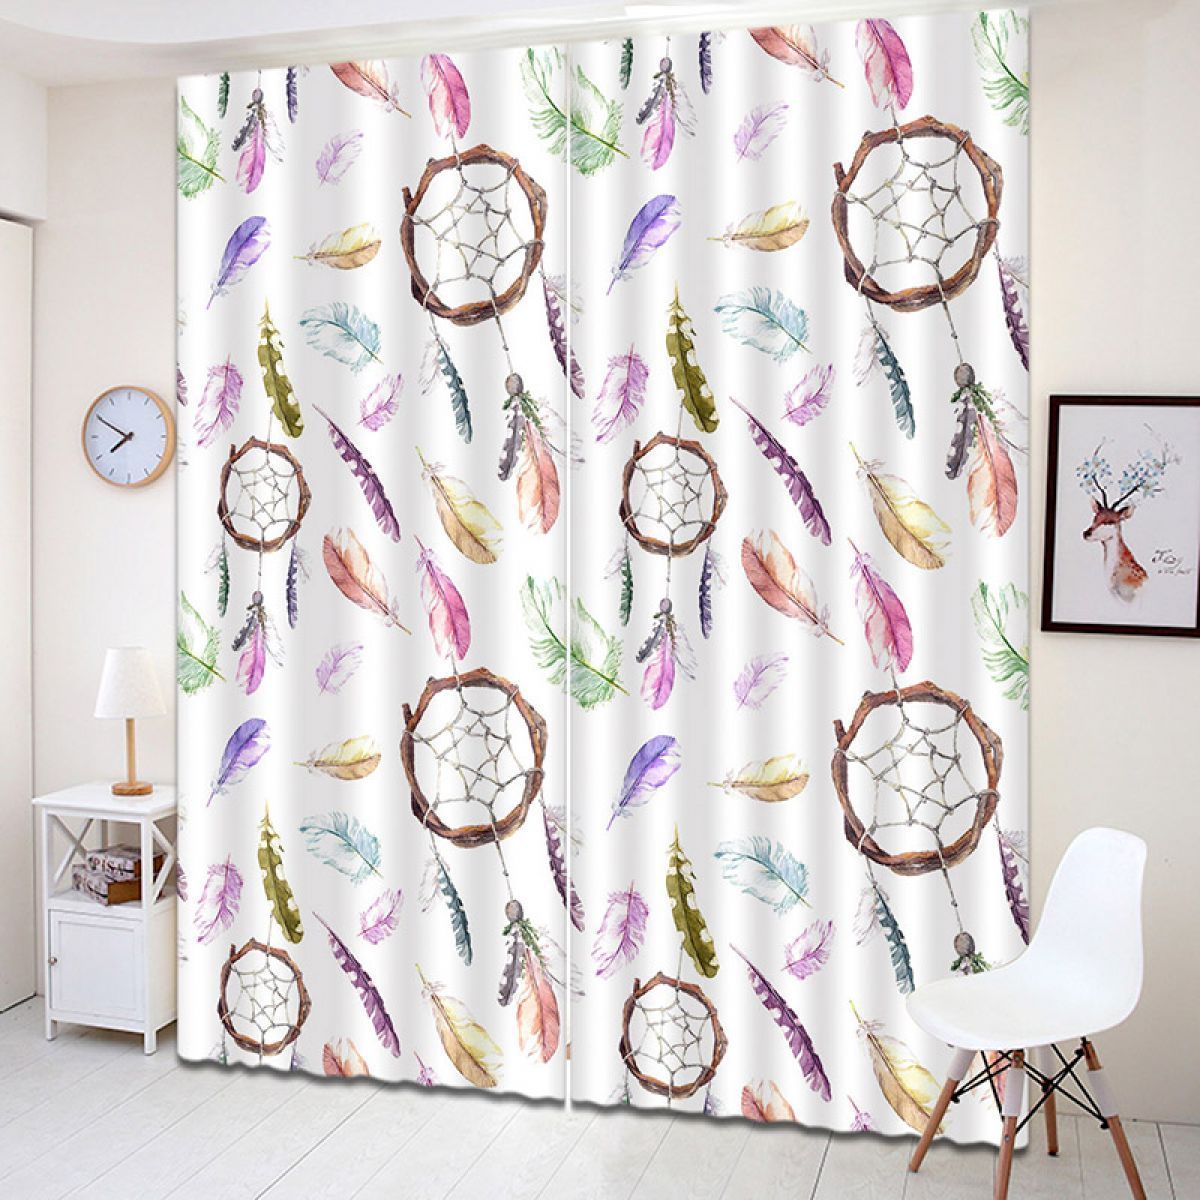 3d dreamcatcher with feather pattern printed window curtain home decor 3590